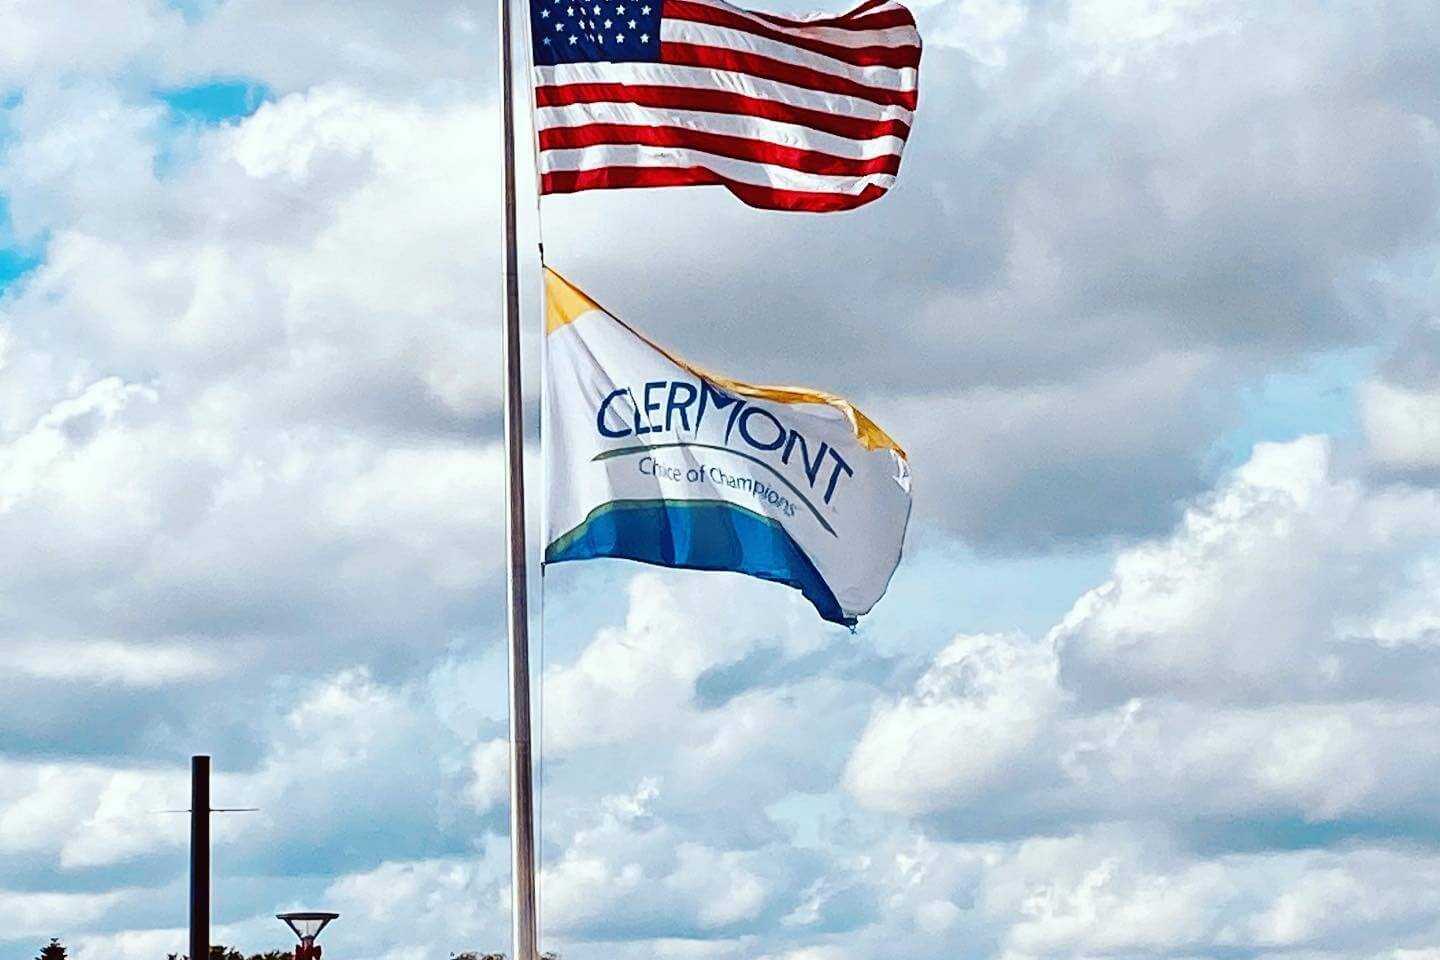 Photo of American flag above Clermont city flag against cloudy blue sky.